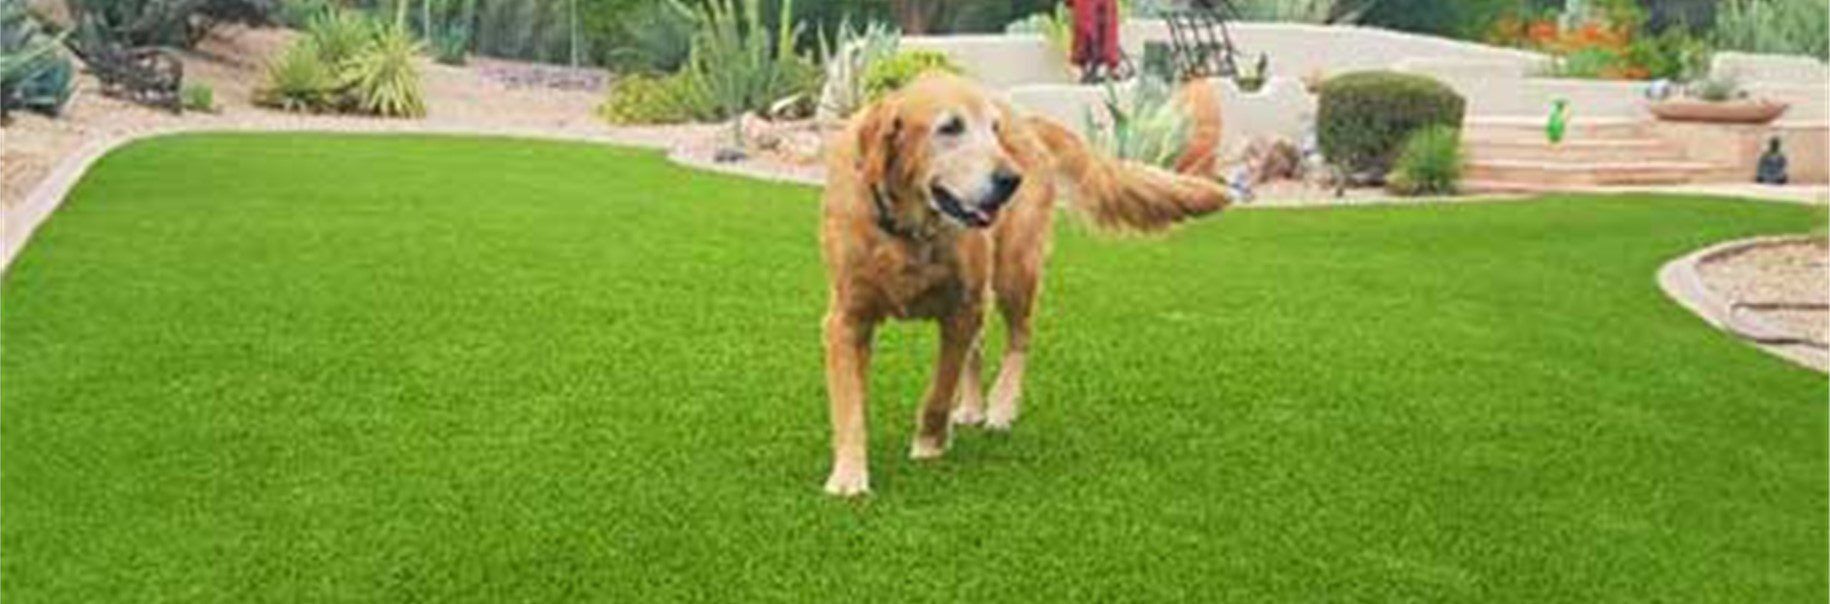 Pet Artificial Grass for any Yards, kennels, dog parks, & more, San Diego